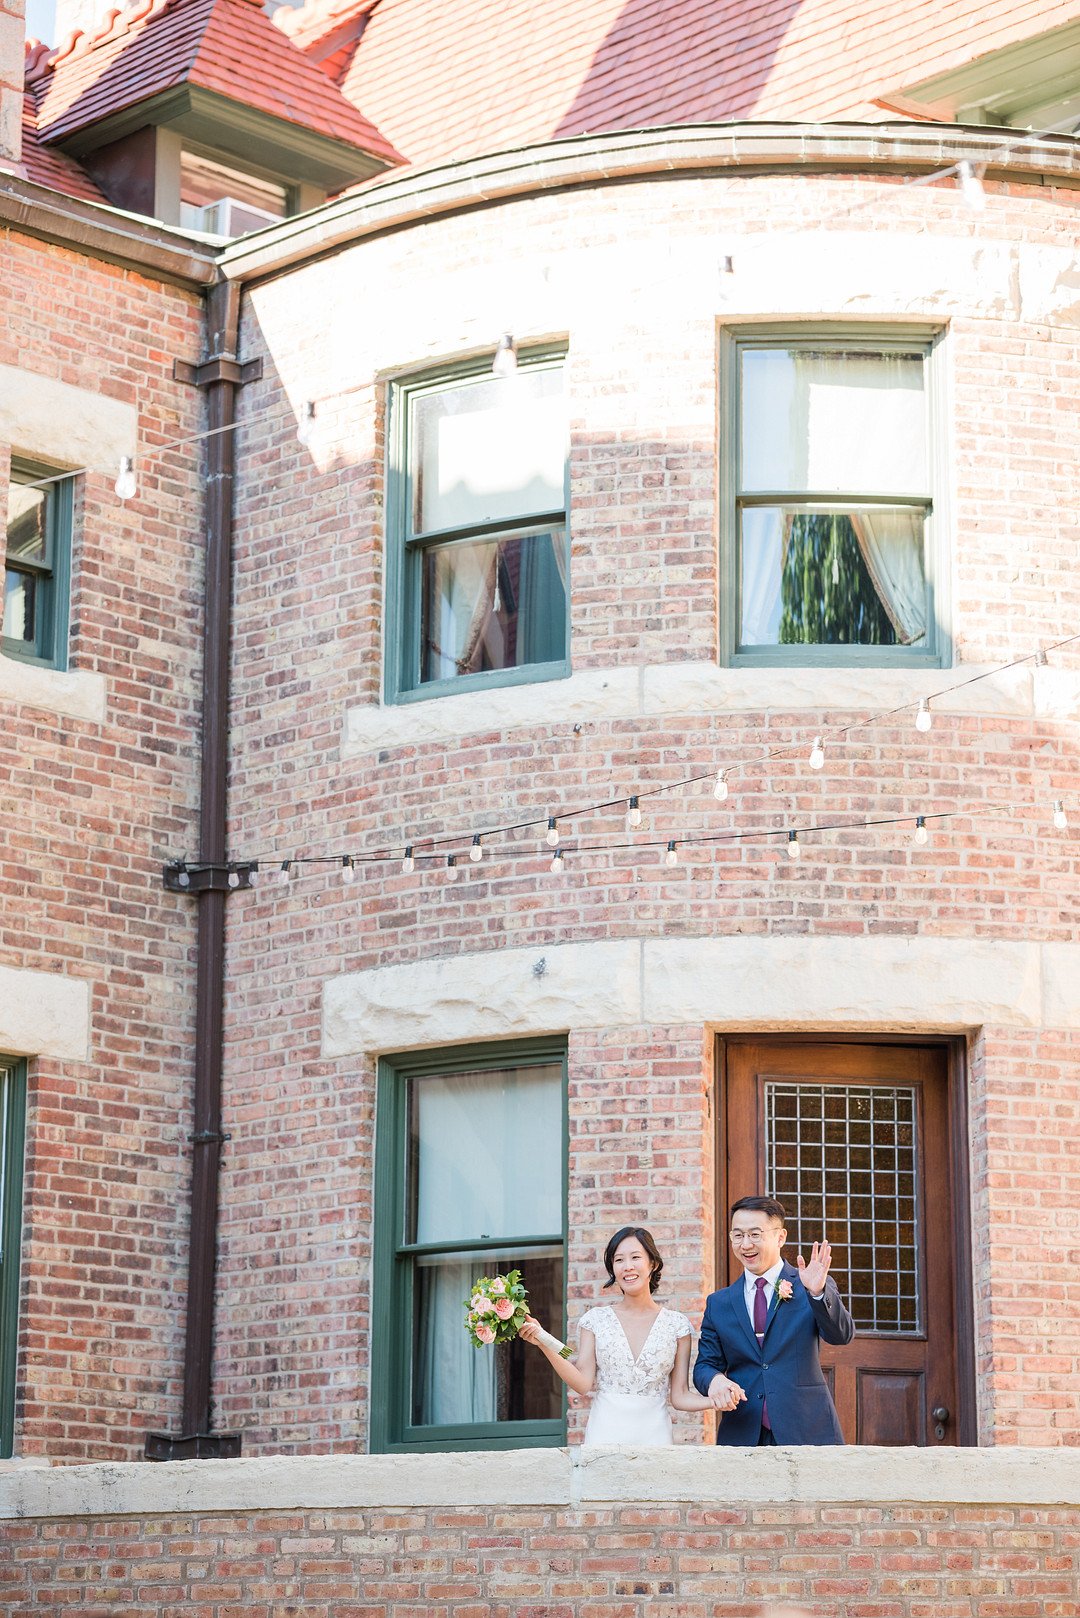 Chan_Chan_Winterlyn Photography_GLESSNER HOUSE CHICAGO WEDDING-98_low.jpg